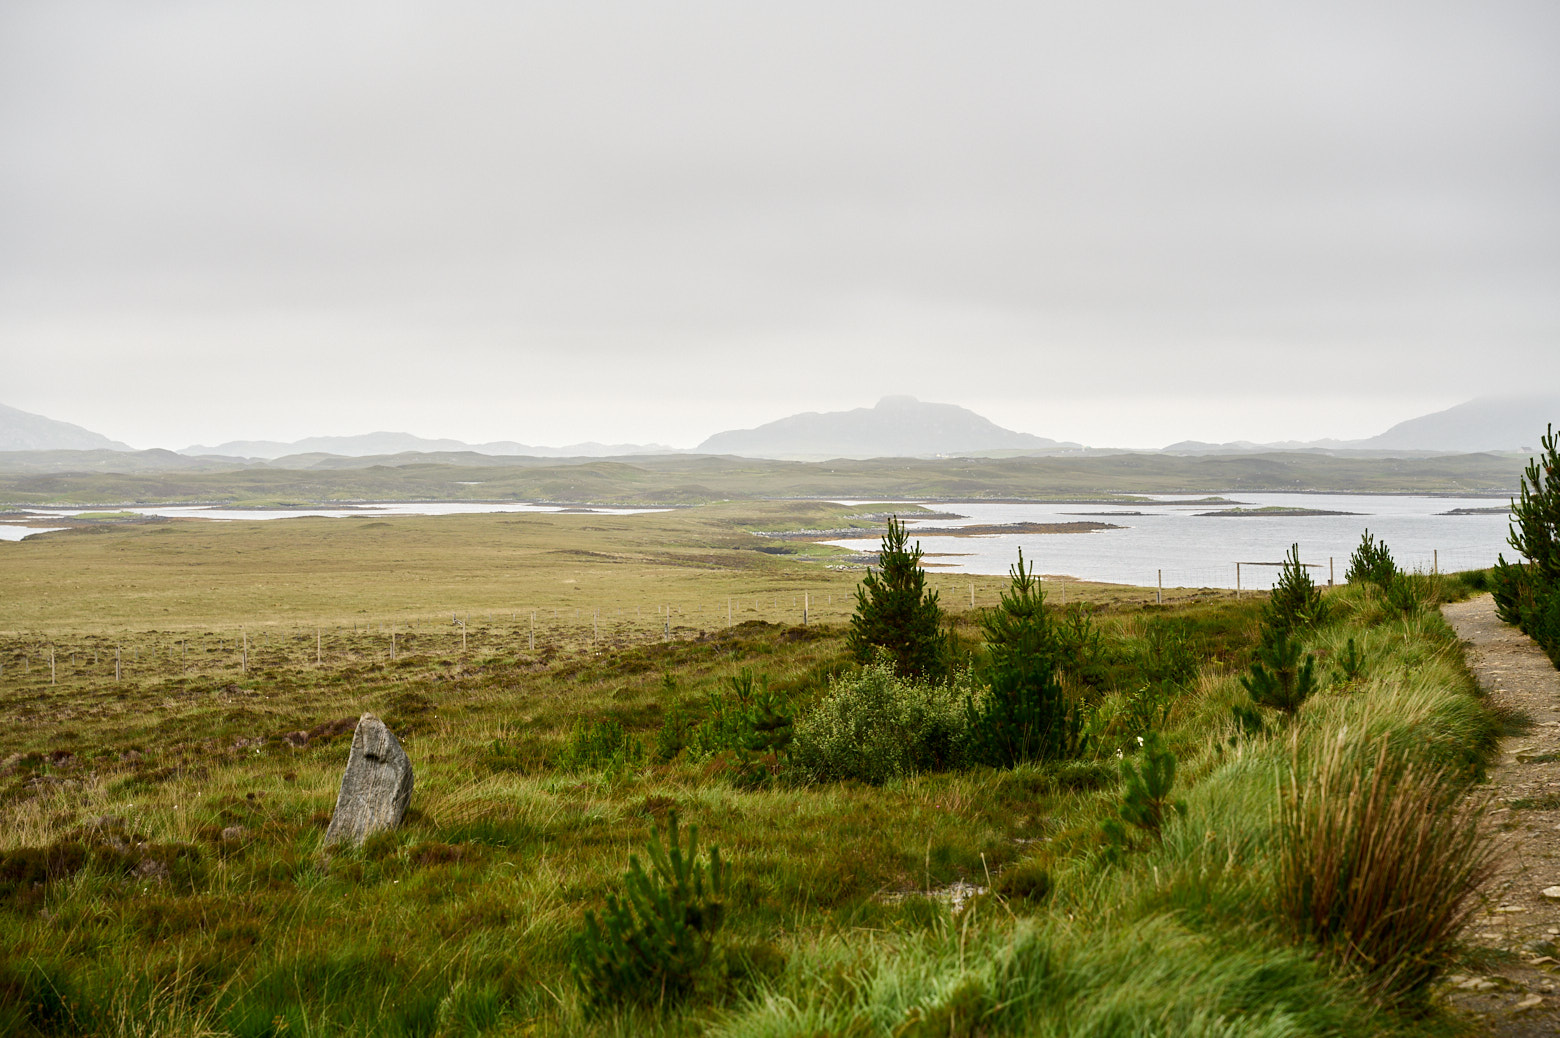 Talking a walk in a forrest in North Uist, Outer hebrides